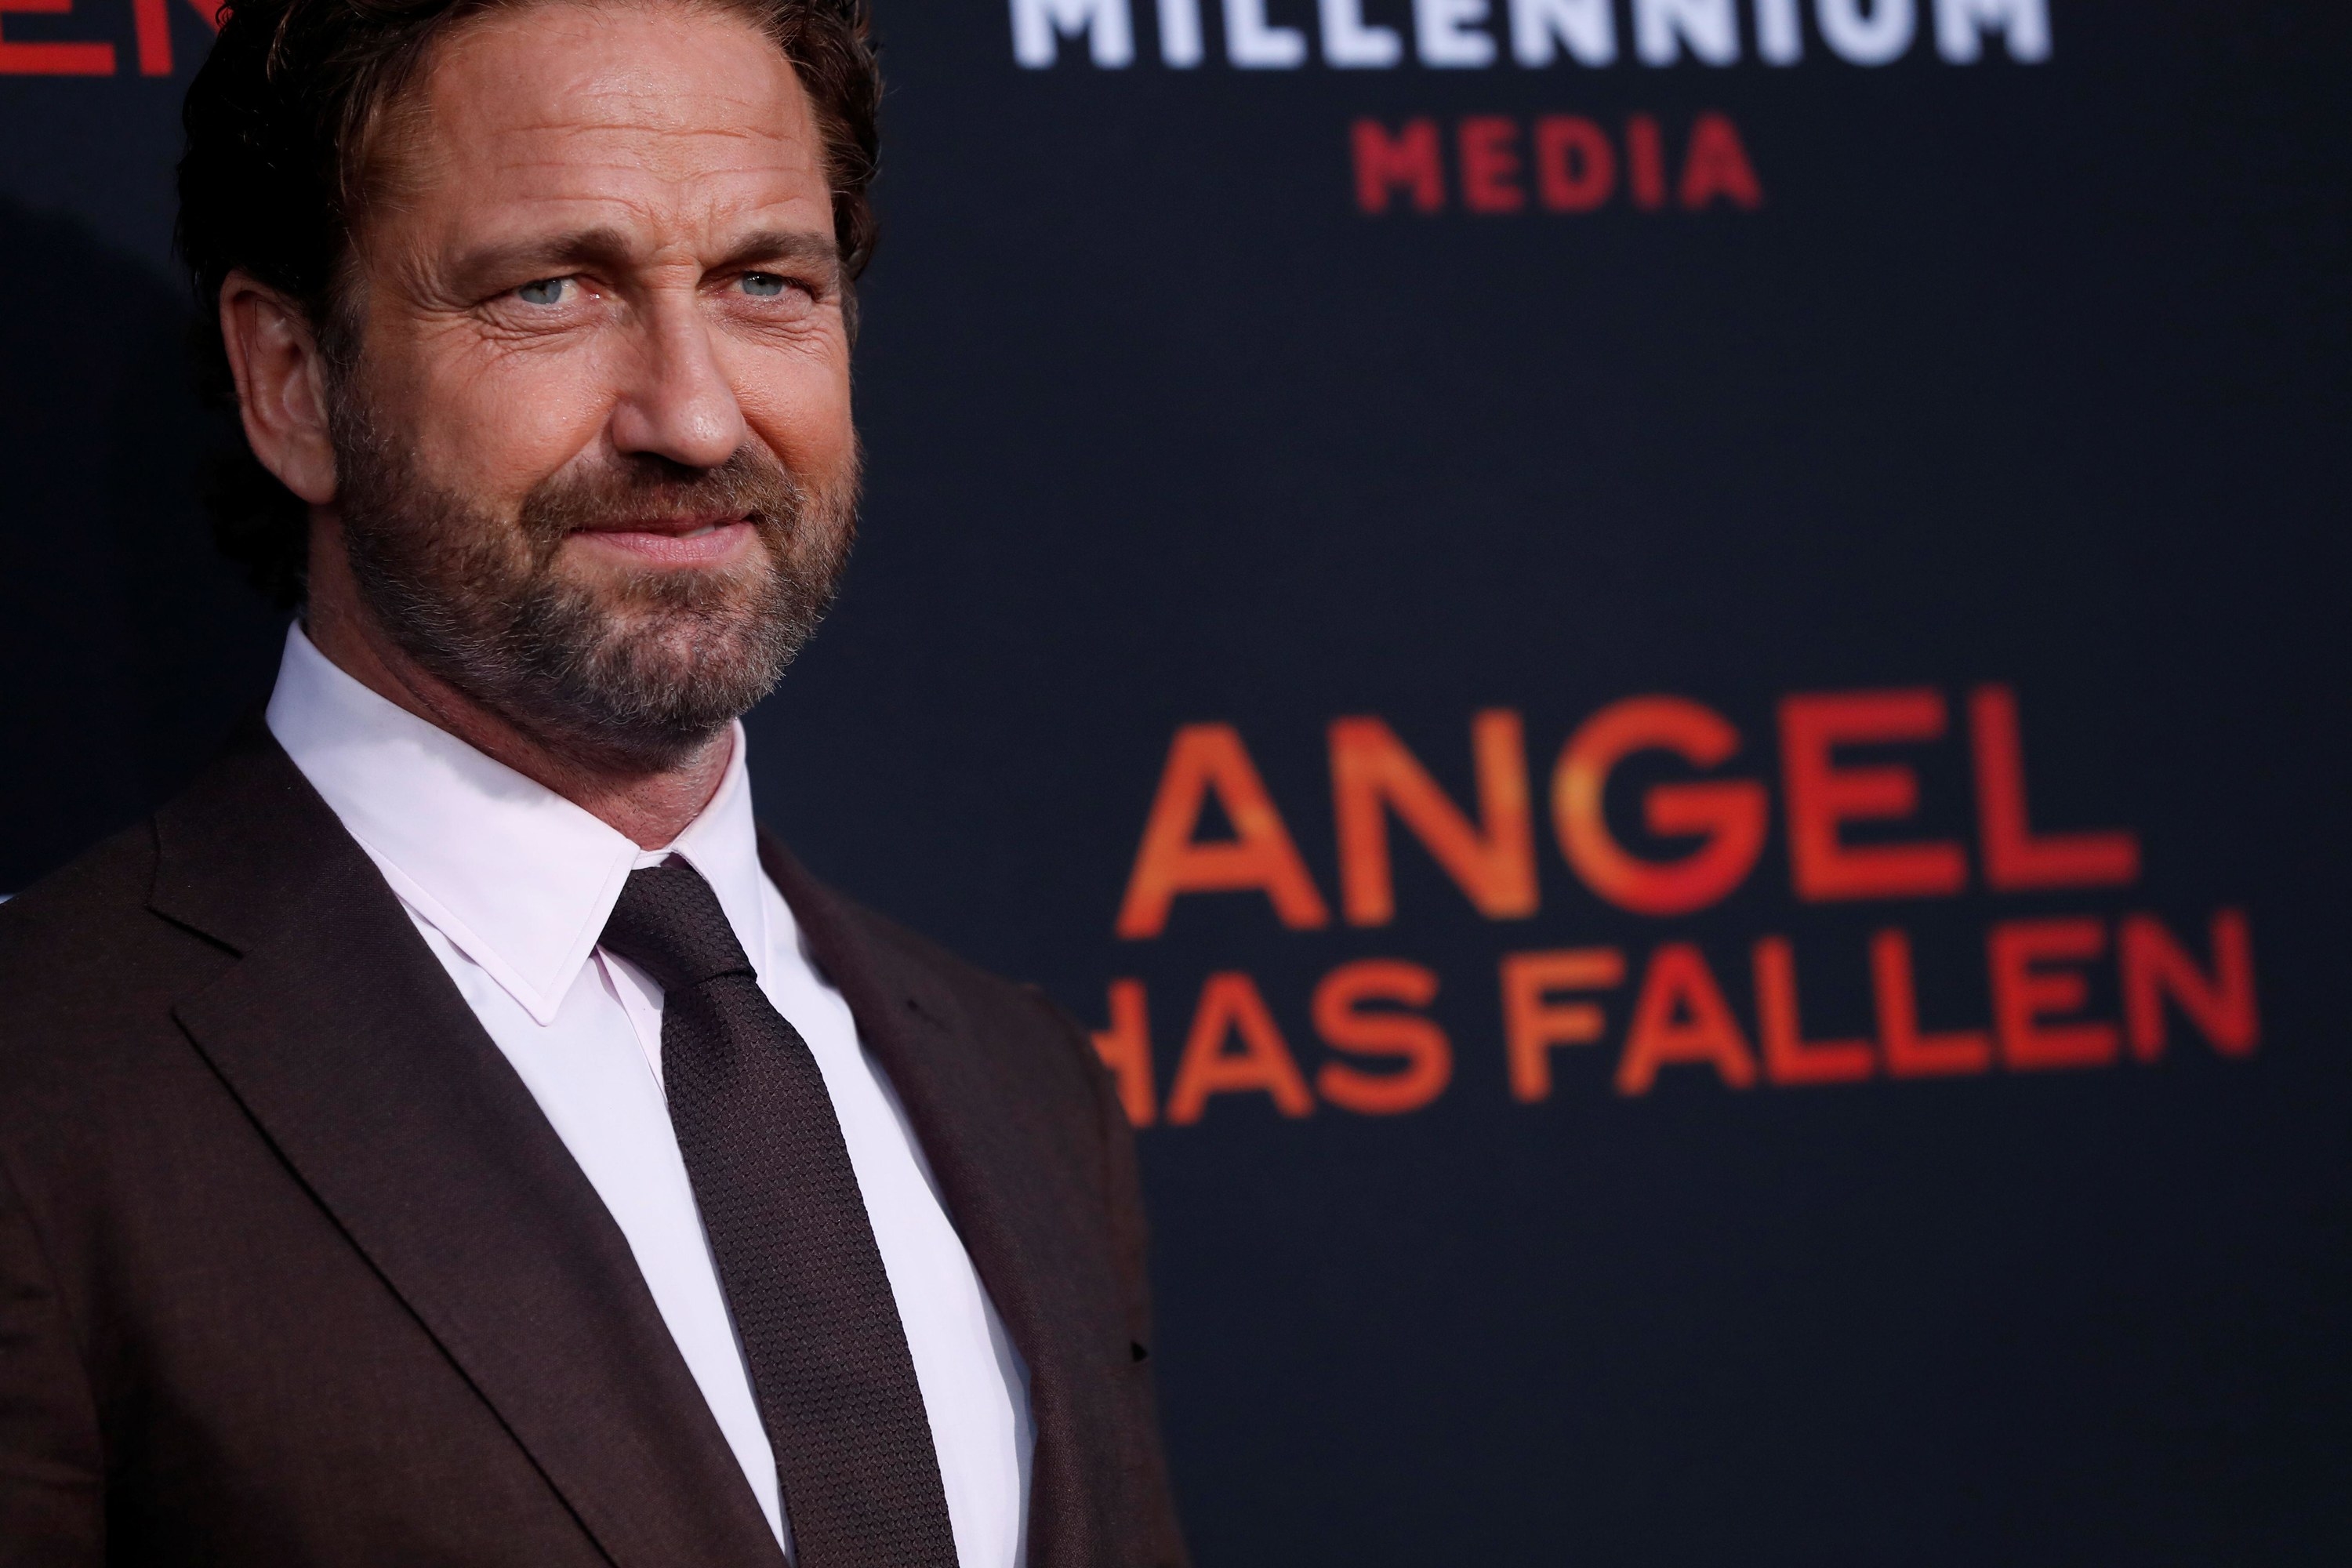 Gerard Butler attends the premiere for the film &quot;Angel Has Fallen&quot; in Los Angeles, California